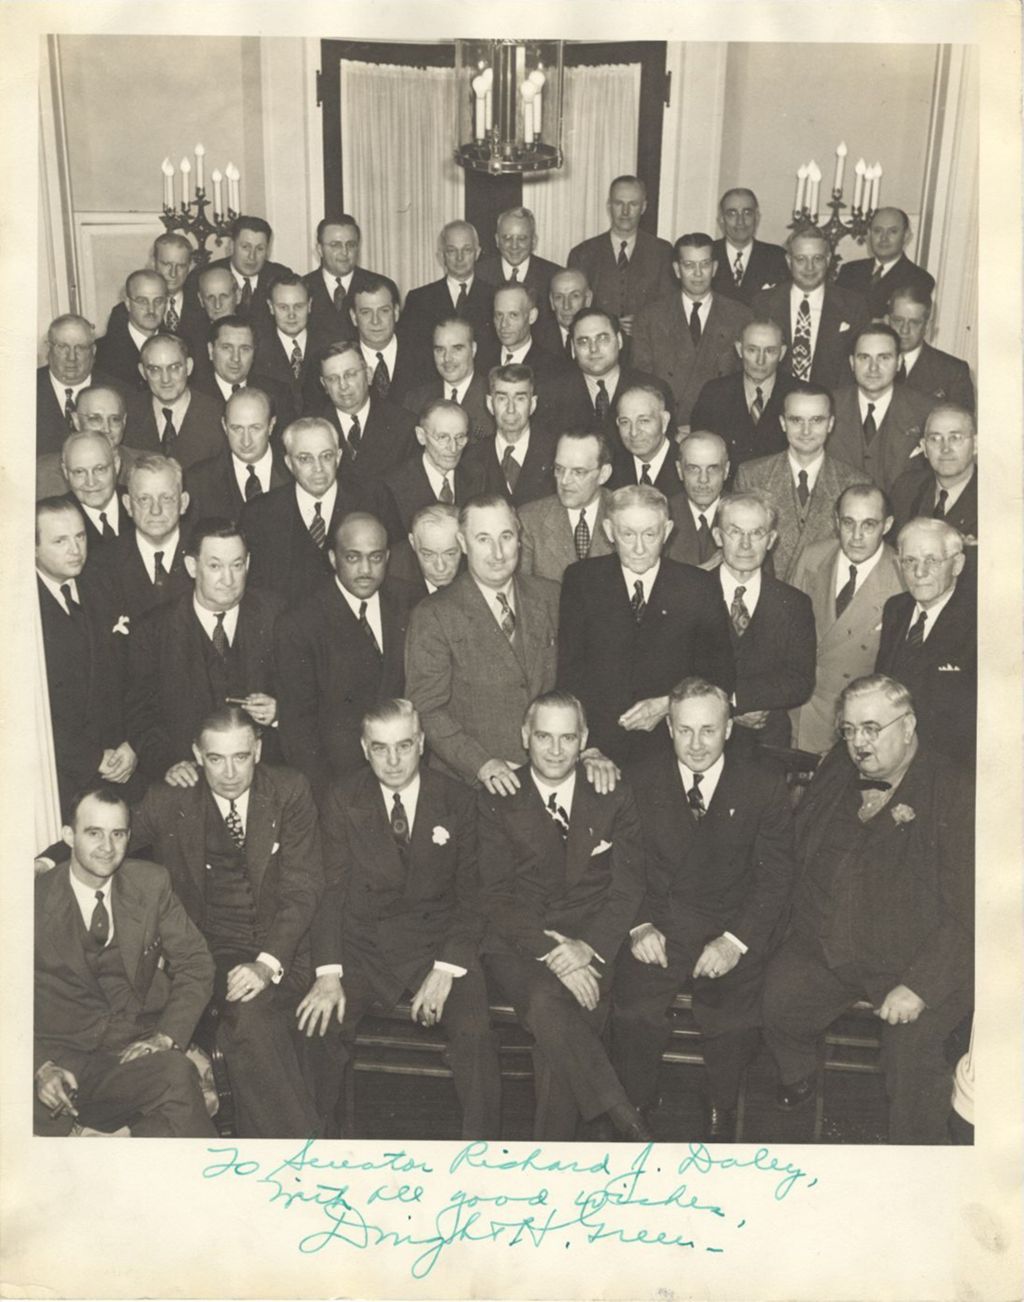 Illinois Governor Dwight H. Green with a group of legislators